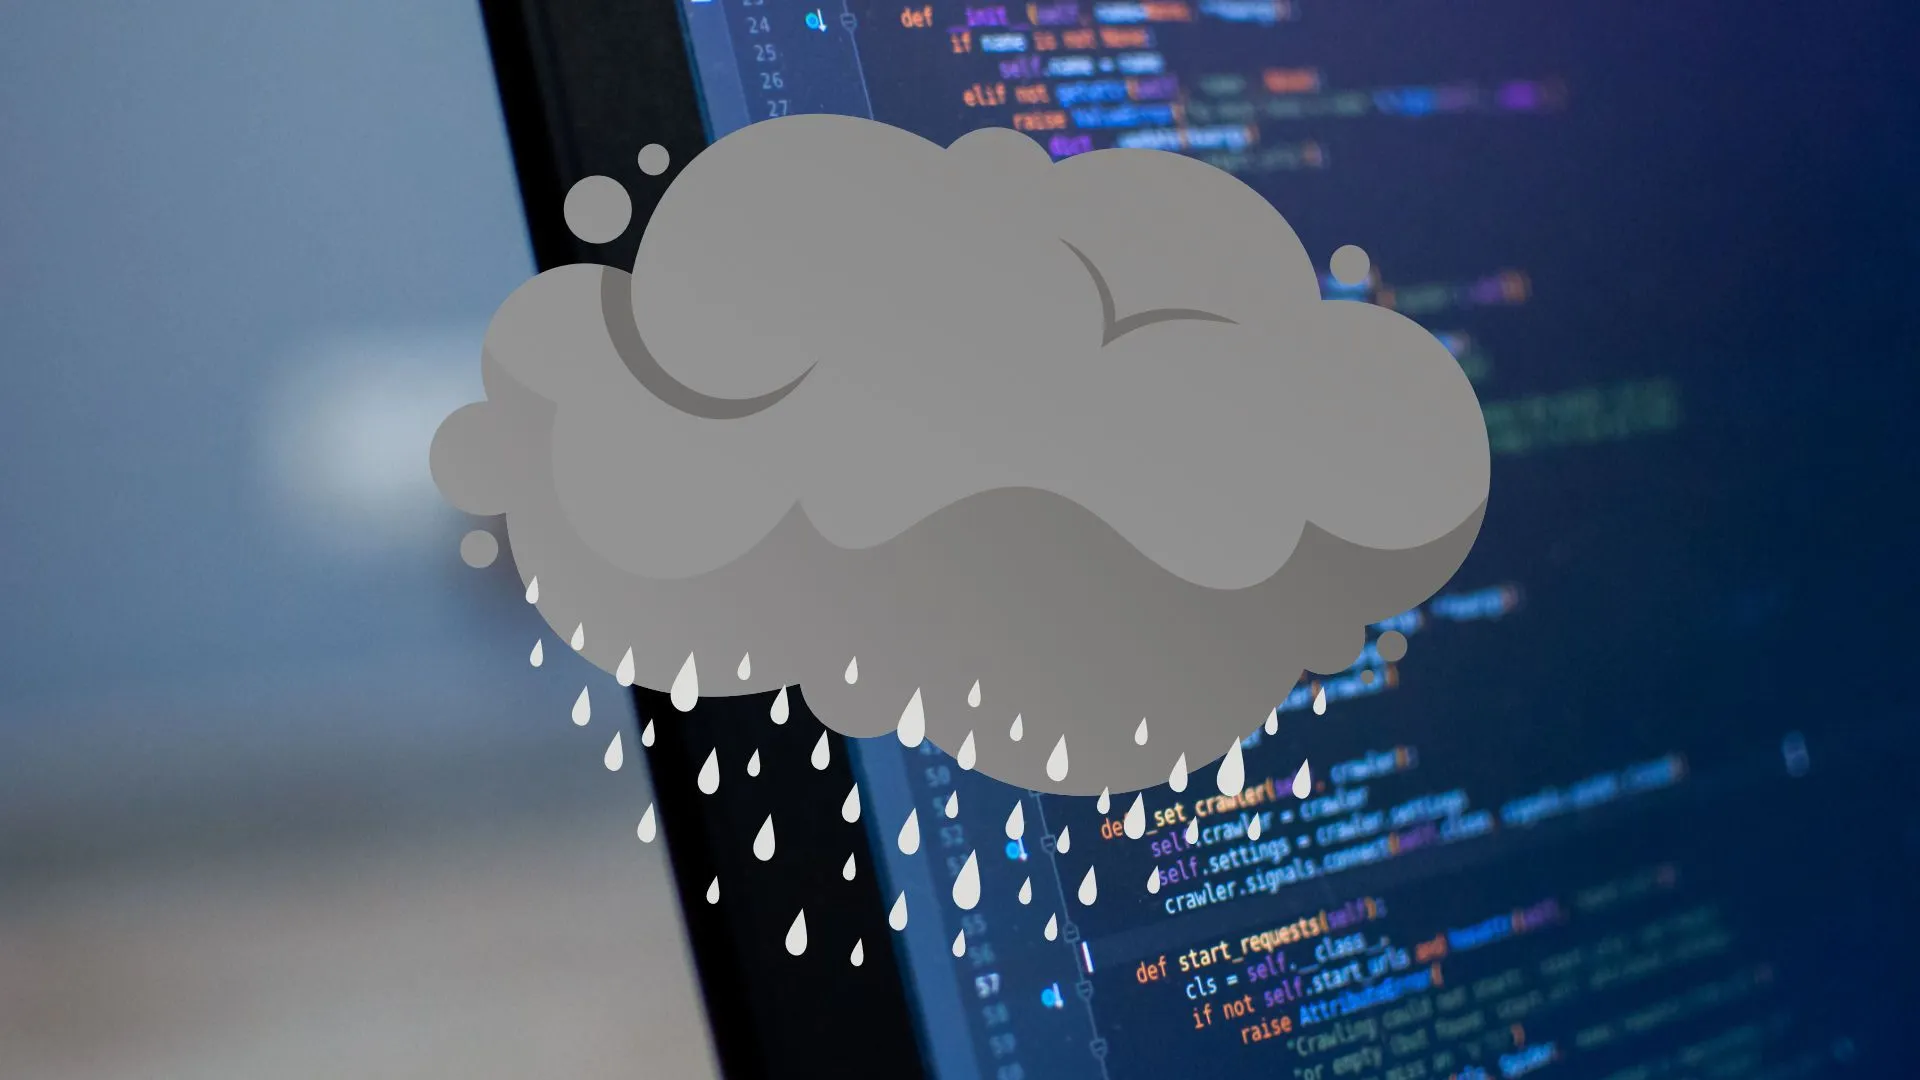 Preventing That “Whoops” Moment With Your Data In The Cloud